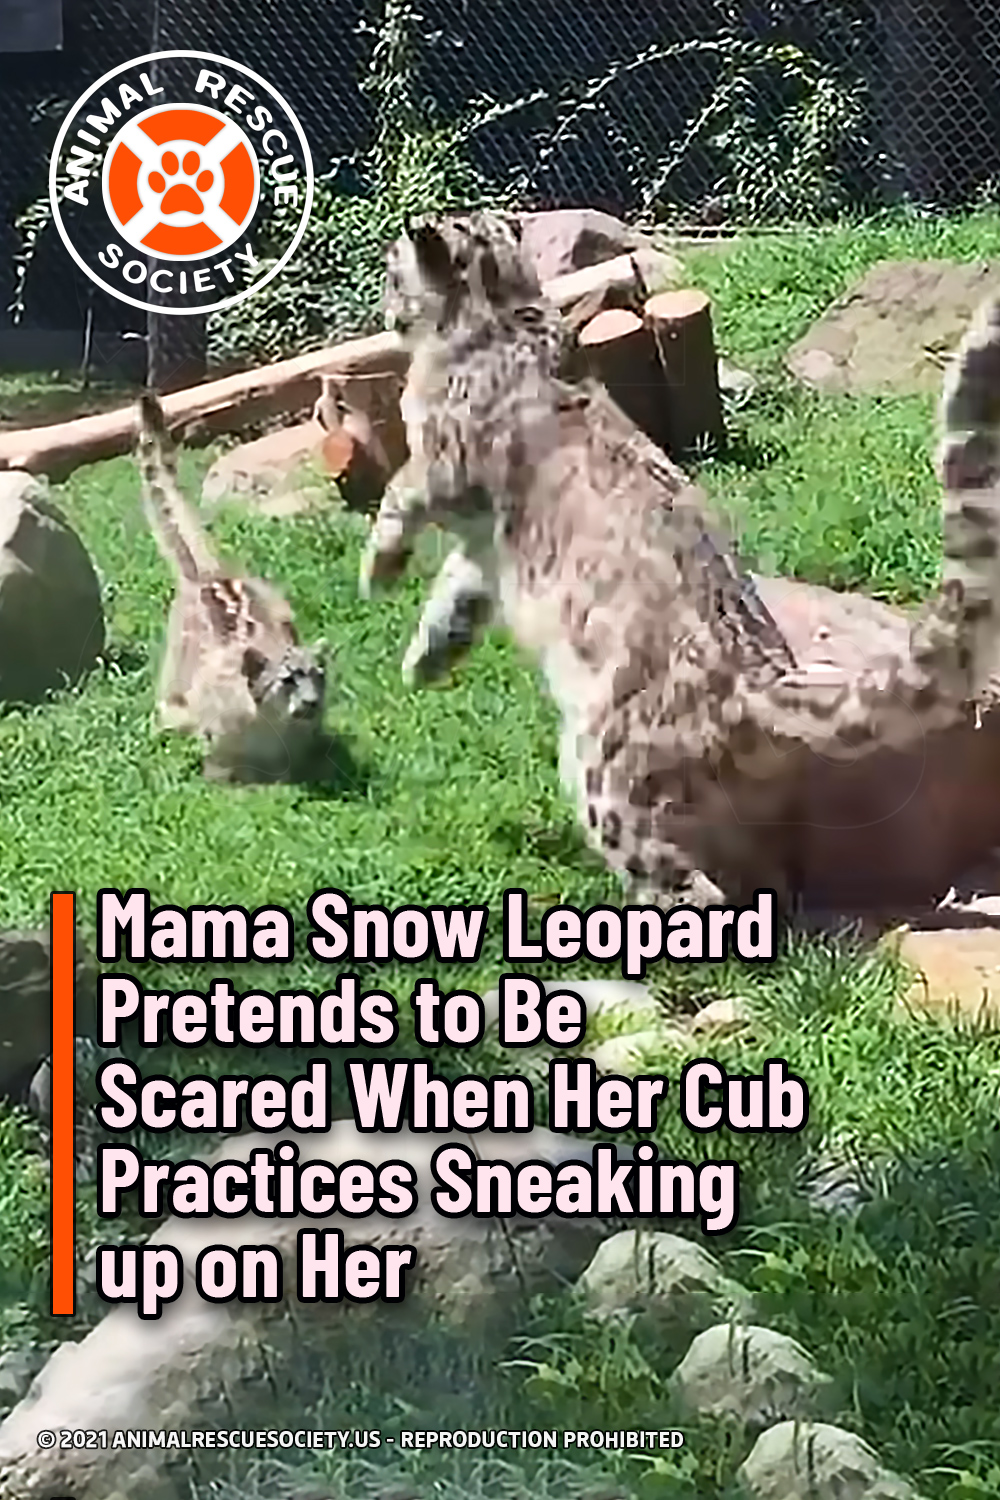 Mama Snow Leopard Pretends to Be Scared When Her Cub Practices Sneaking up on Her